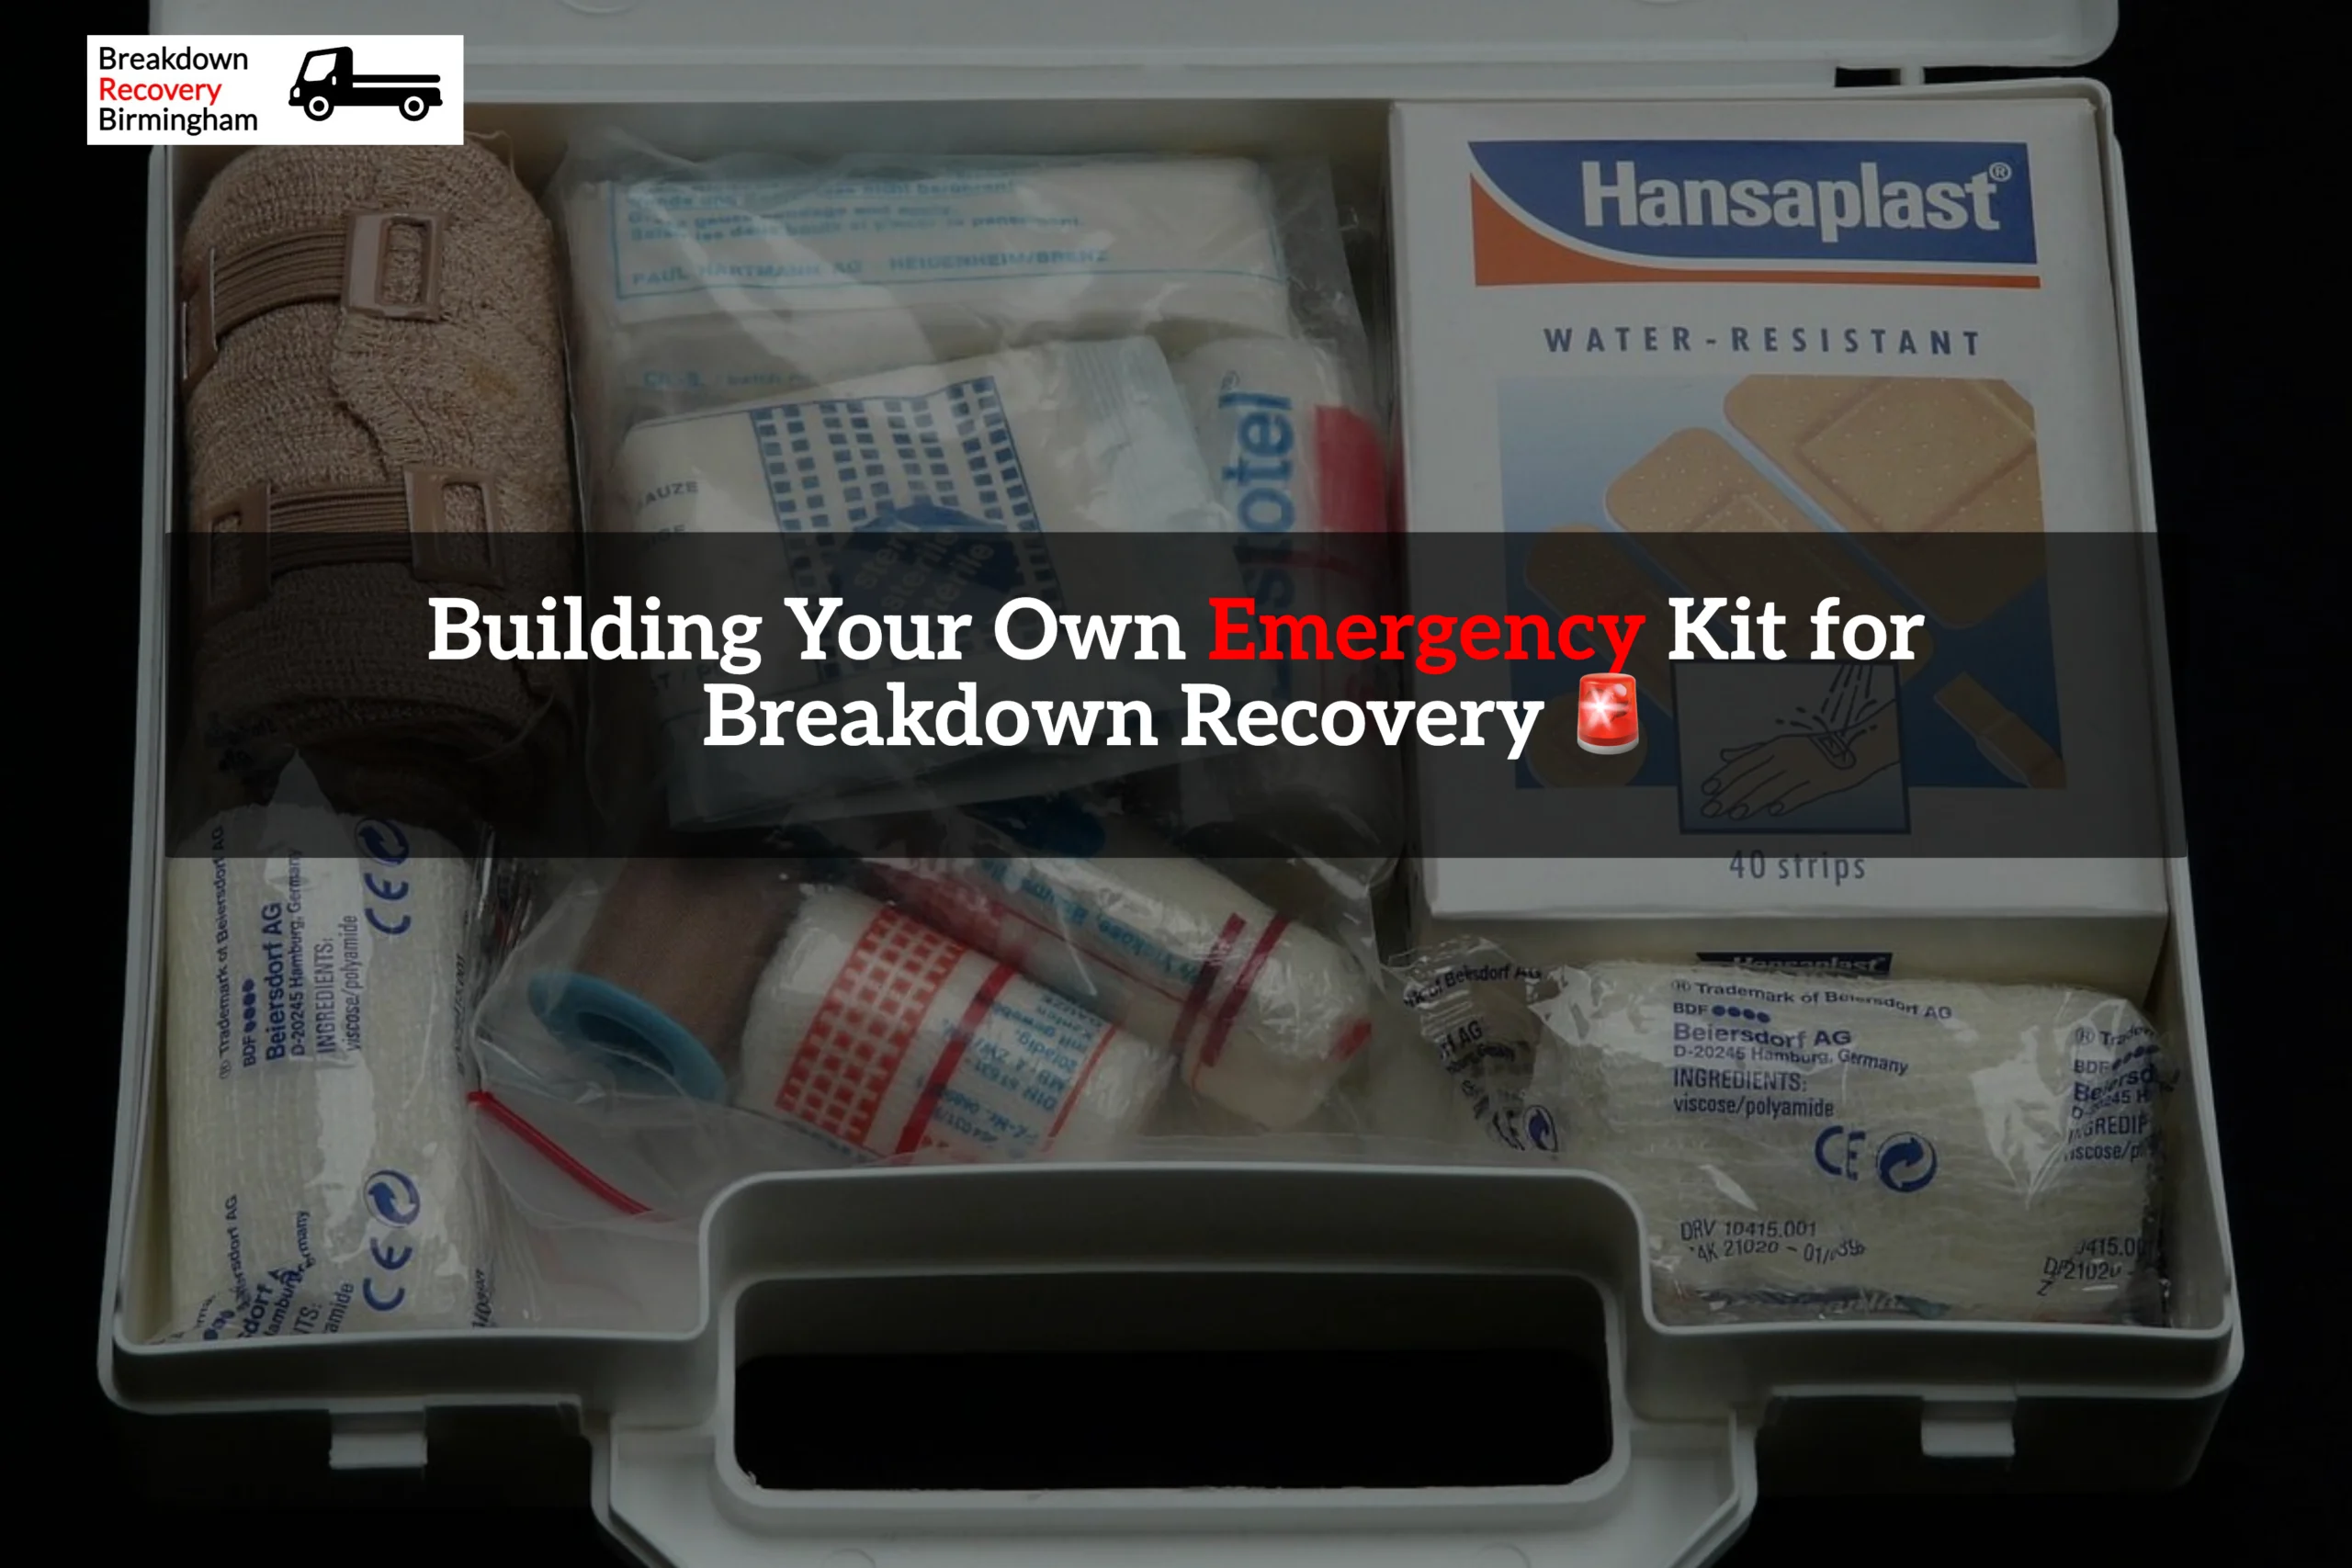 Building Your Own Emergency Kit for Breakdown Recovery